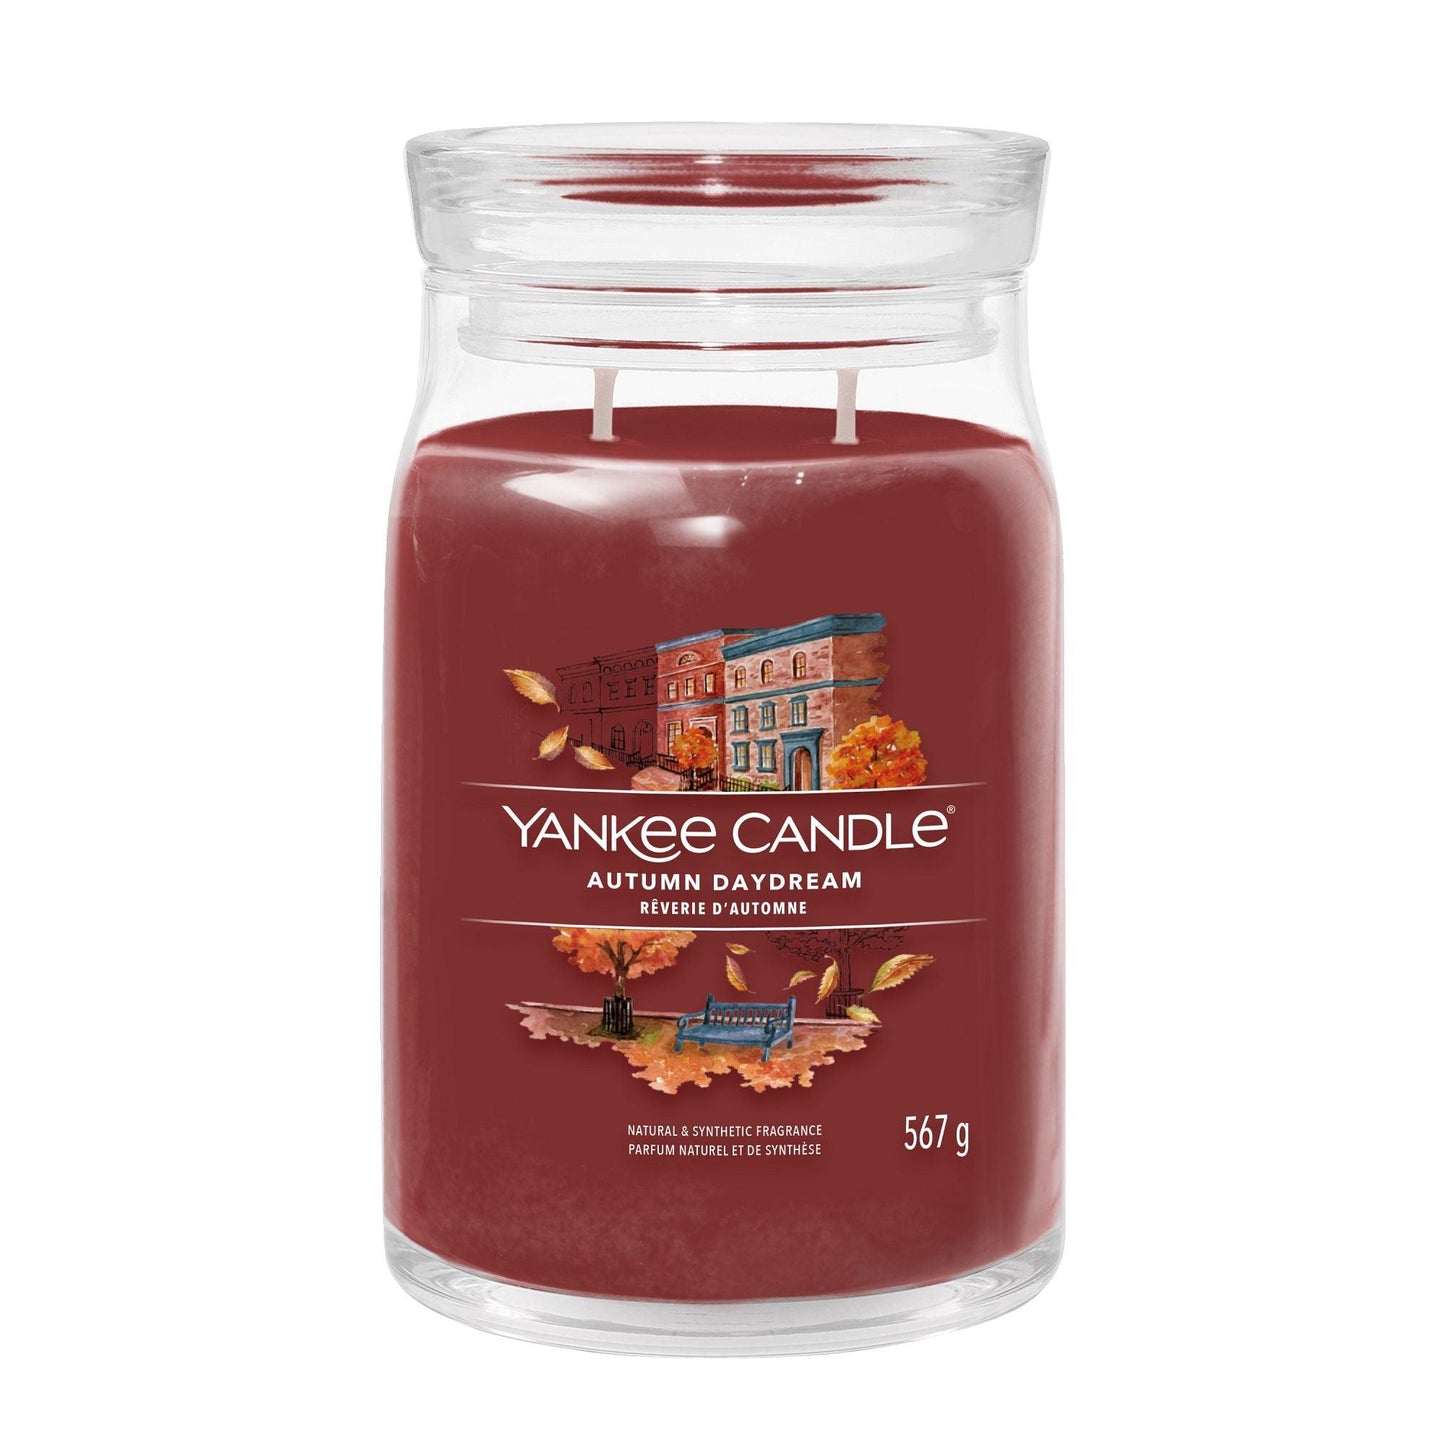 Autumn Daydream Signature Large Jar by Yankee Candle